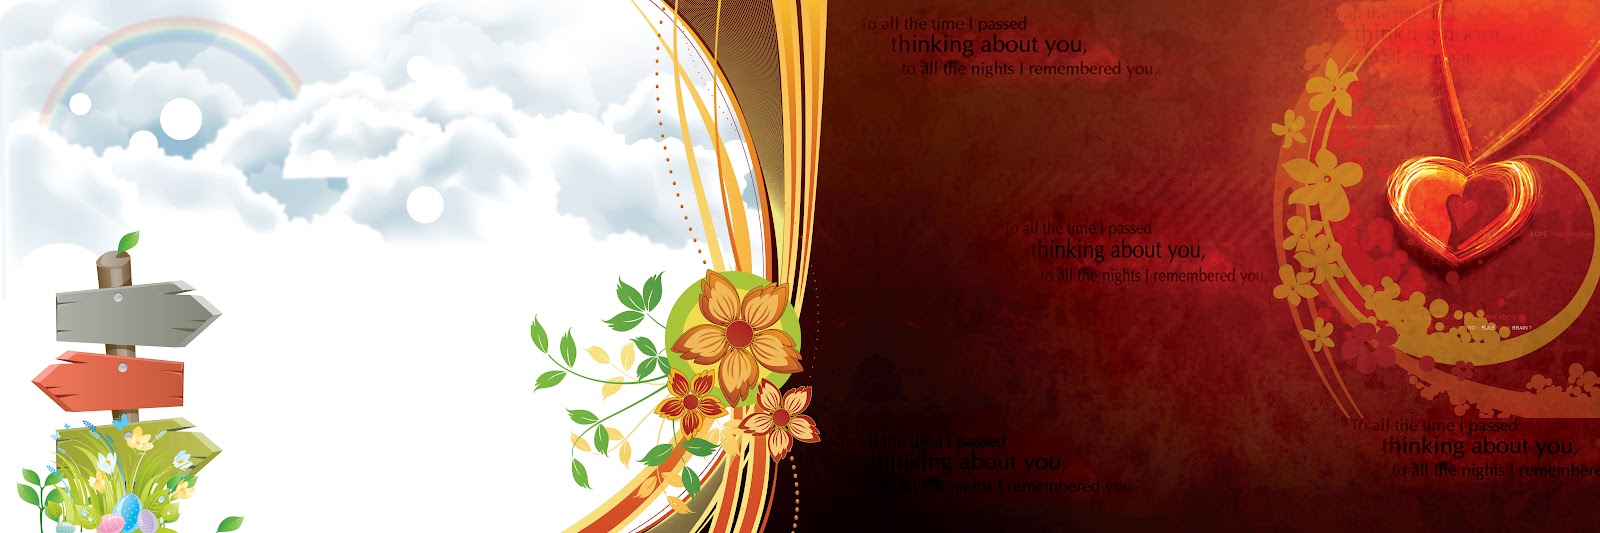 indian wedding clipart psd download - photo #28